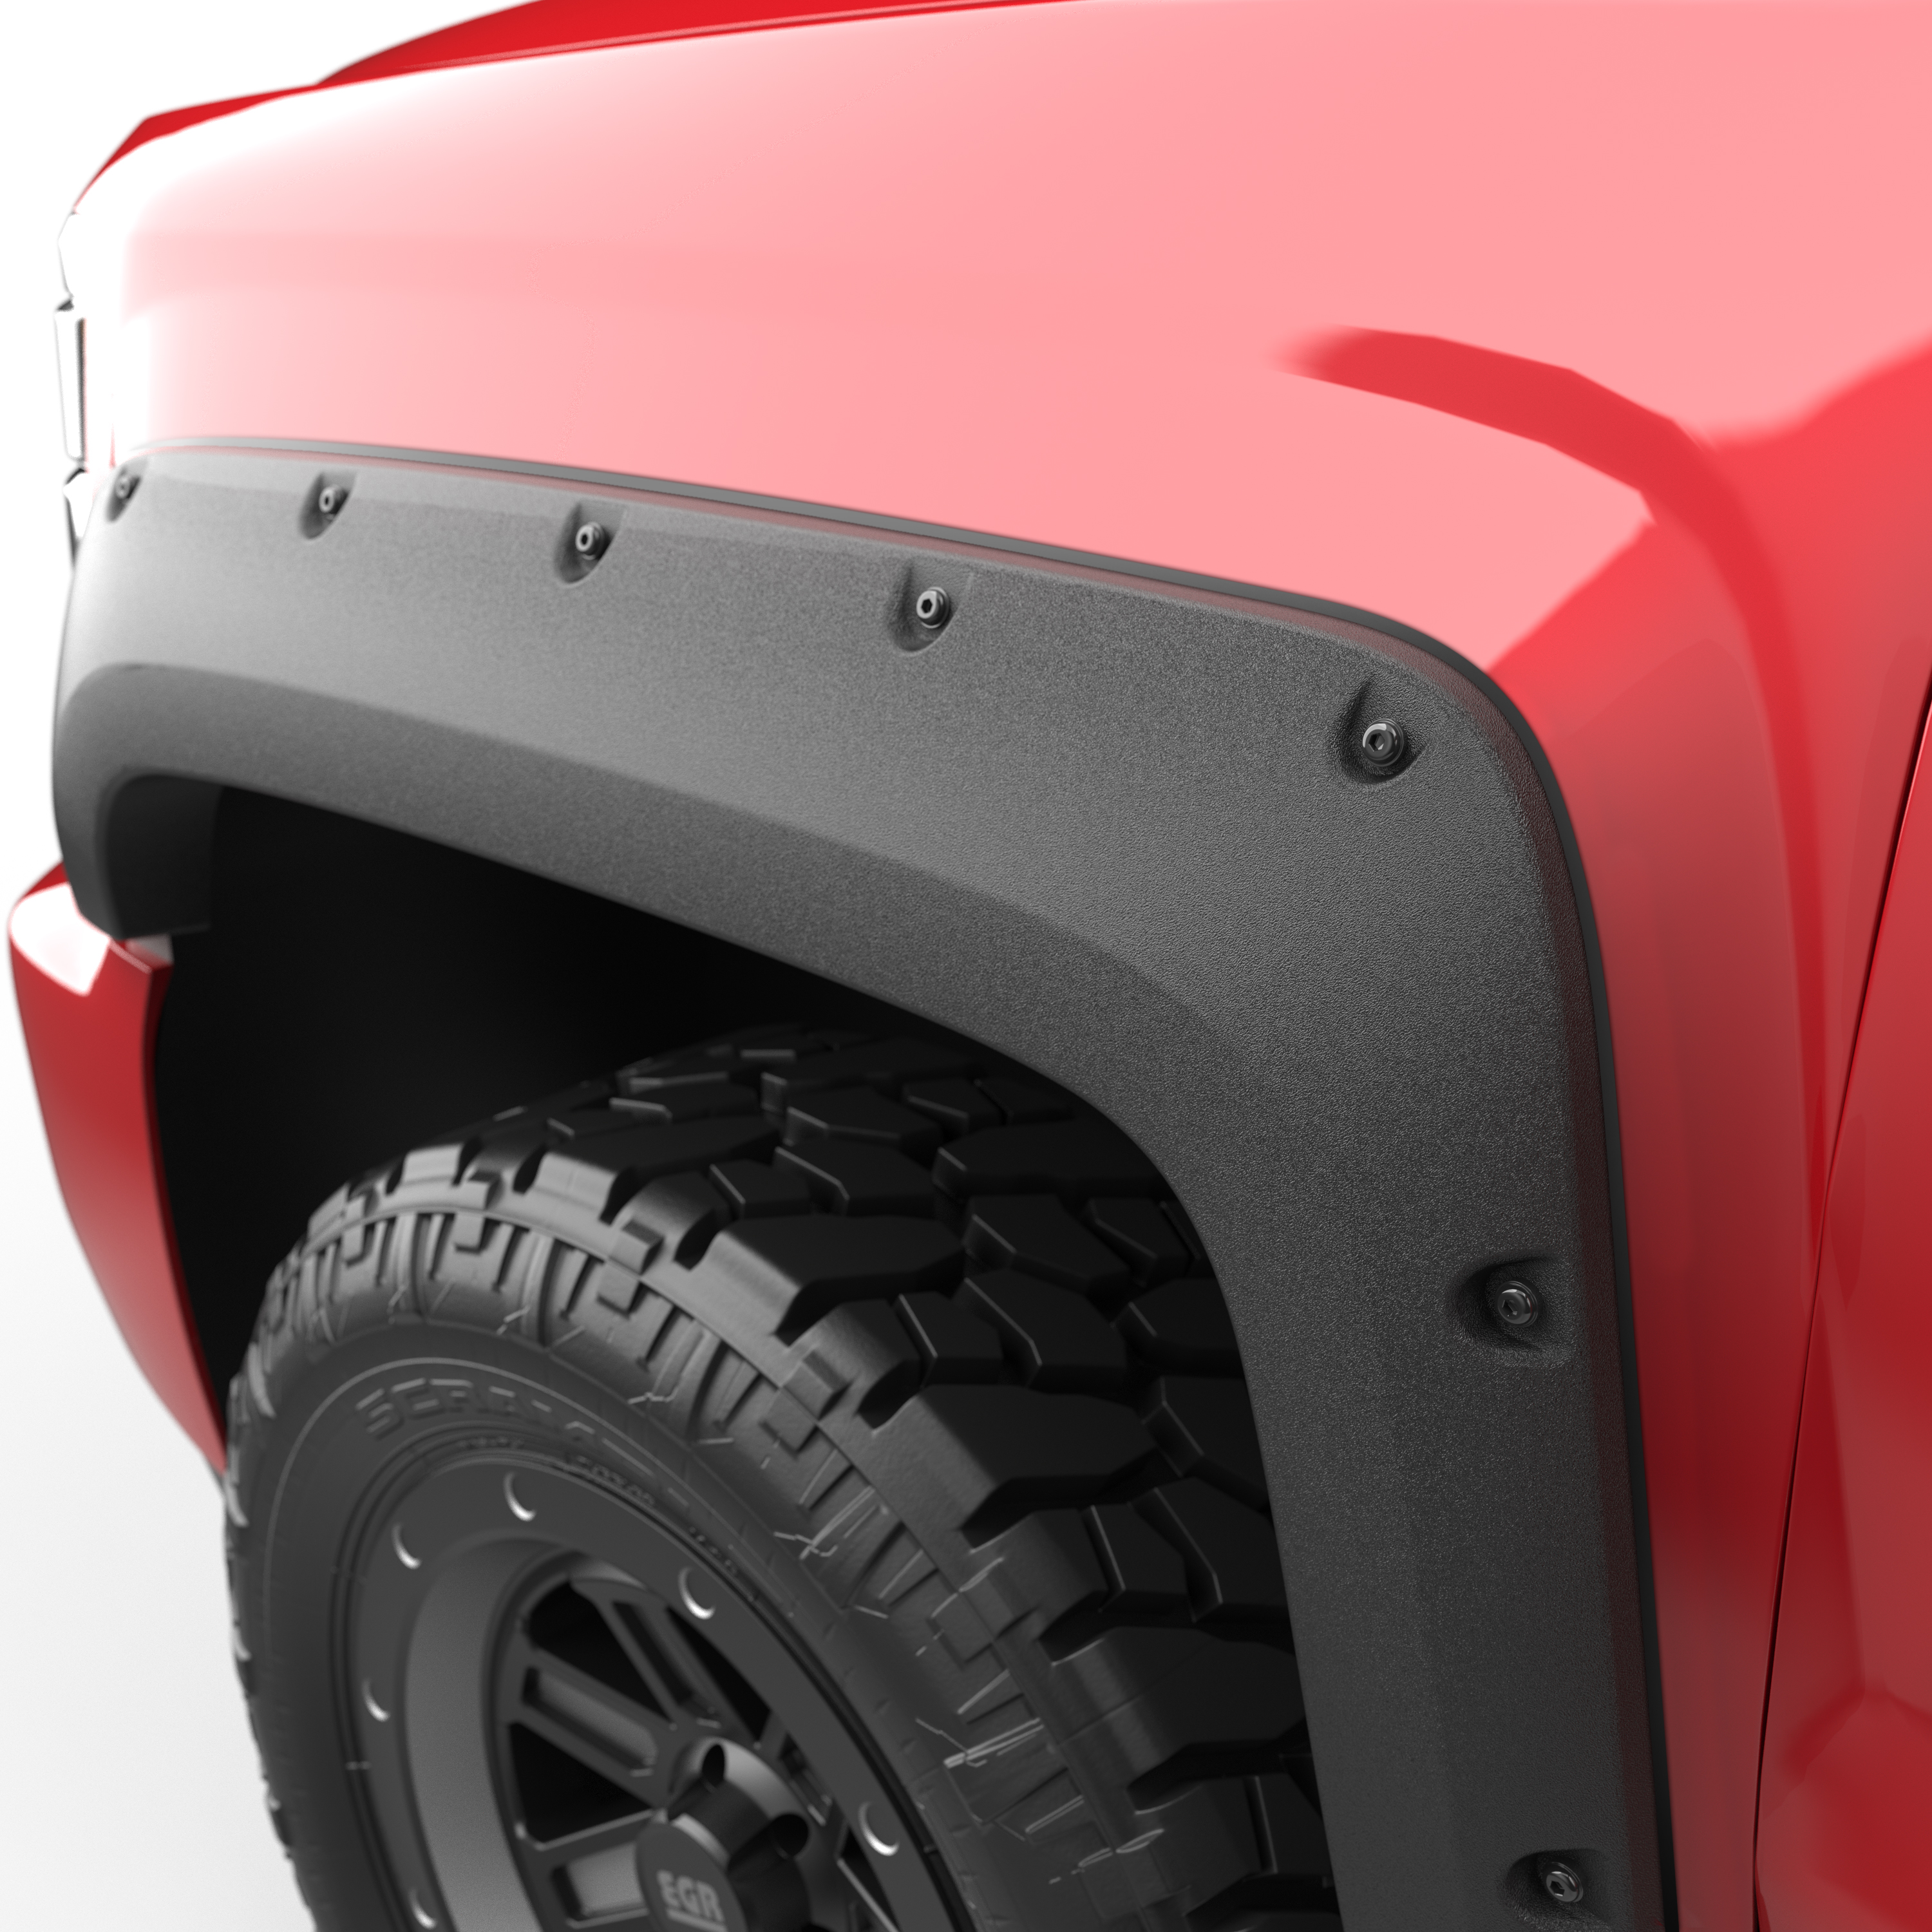 Fender Flare Fits 2014-2018 Chevrolet Silverado 1500 High Country Custom Bed Length: 97.8, 78.9, 78.8 & Doors: 4, 2 & Extended Cab , Crew Cab , Standard Cab 
2015-2019 Chevrolet Silverado 2500 HD High Country Bed Length: 97.6, 78.8 & Doors: 4, 2 & C